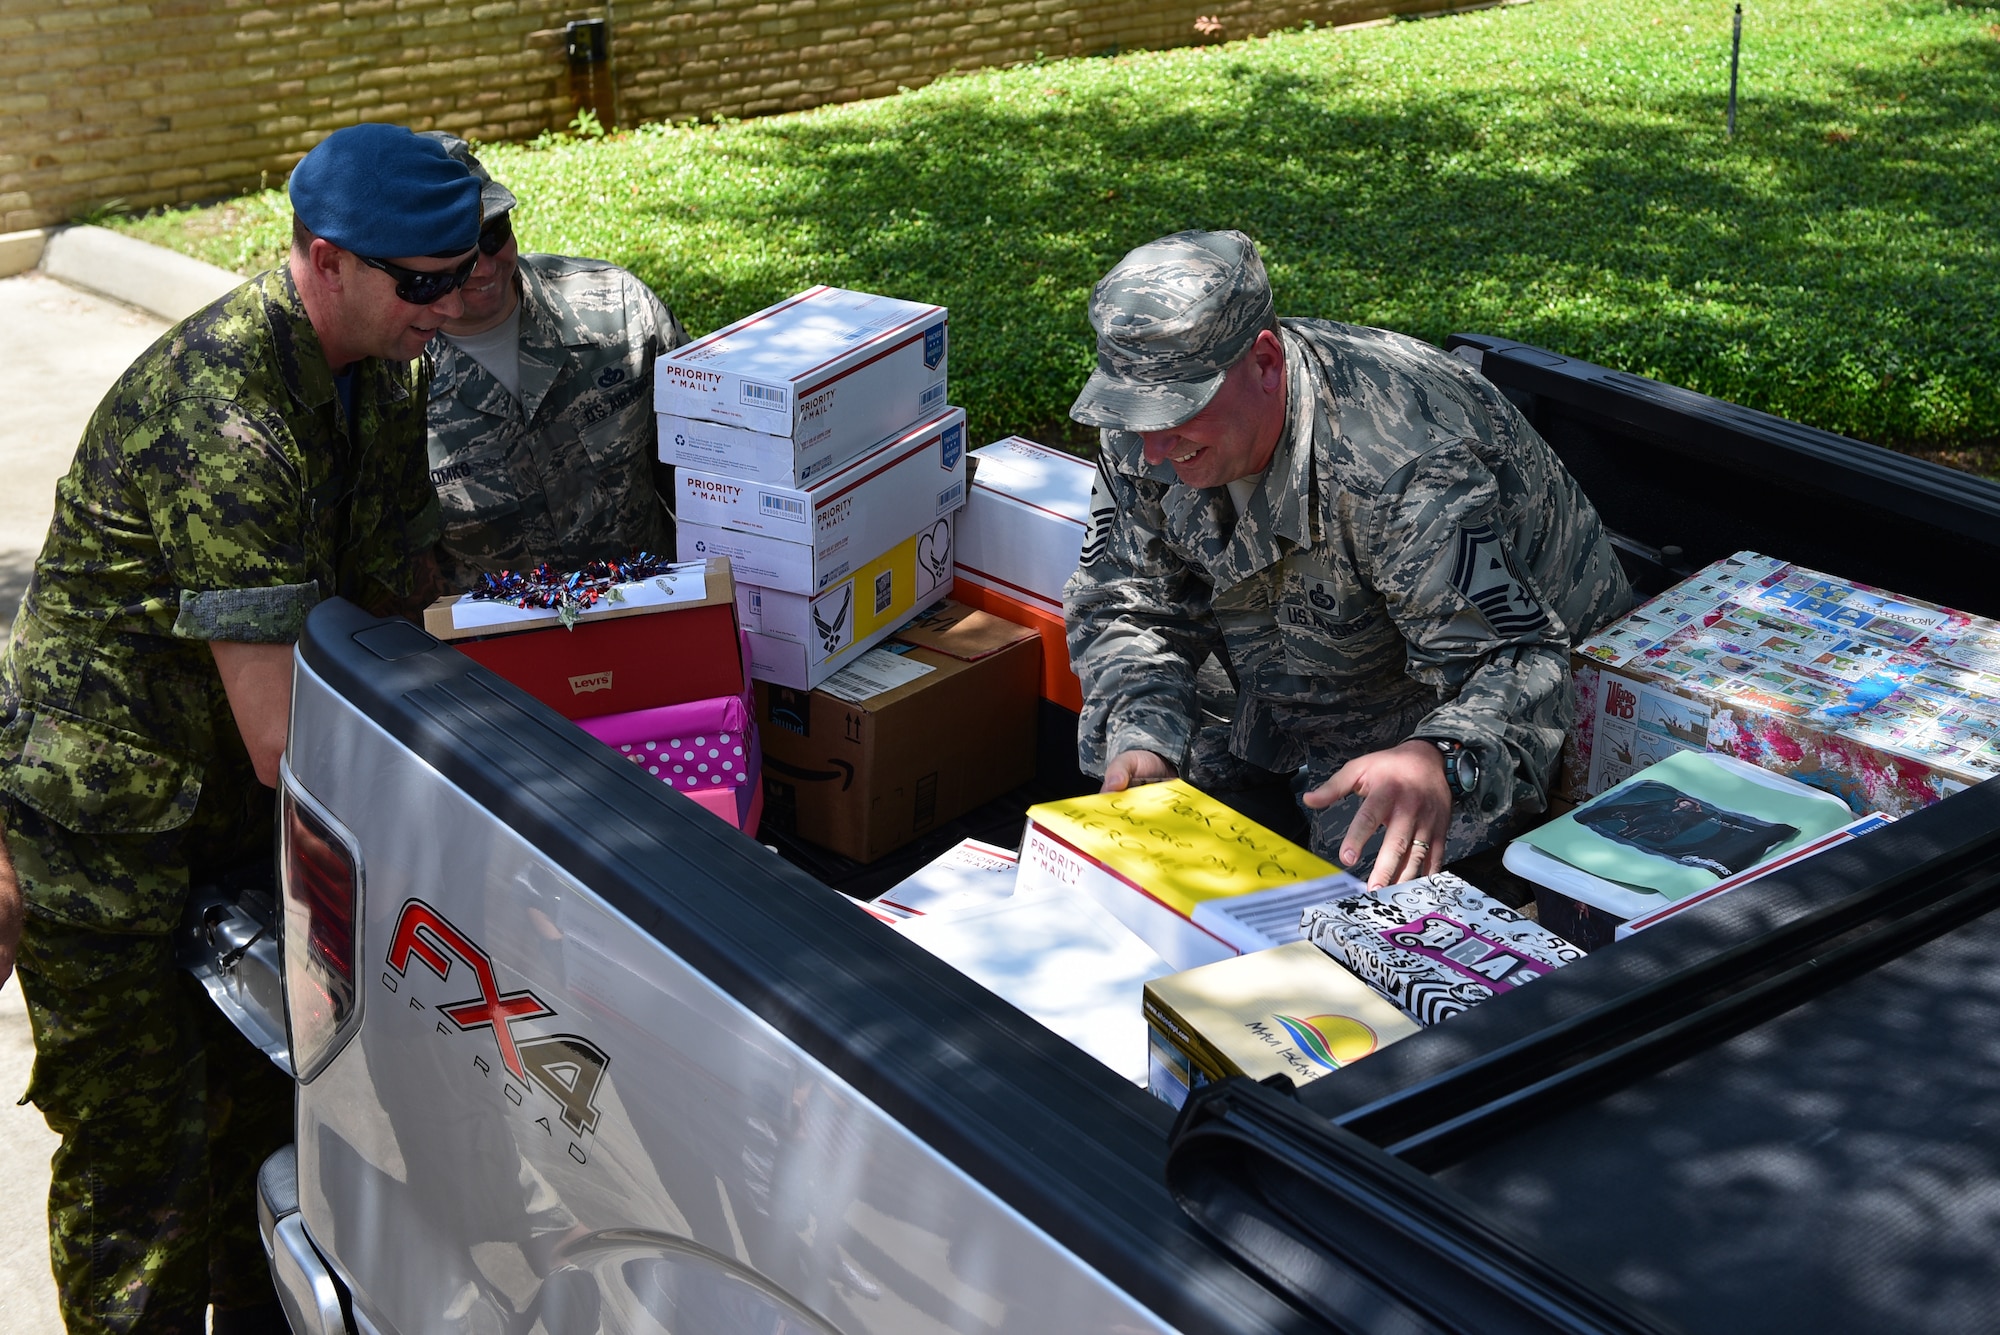 Senior enlisted members assigned to Tyndall Air Force Base, Florida, arrange care packages into the bed of a truck.